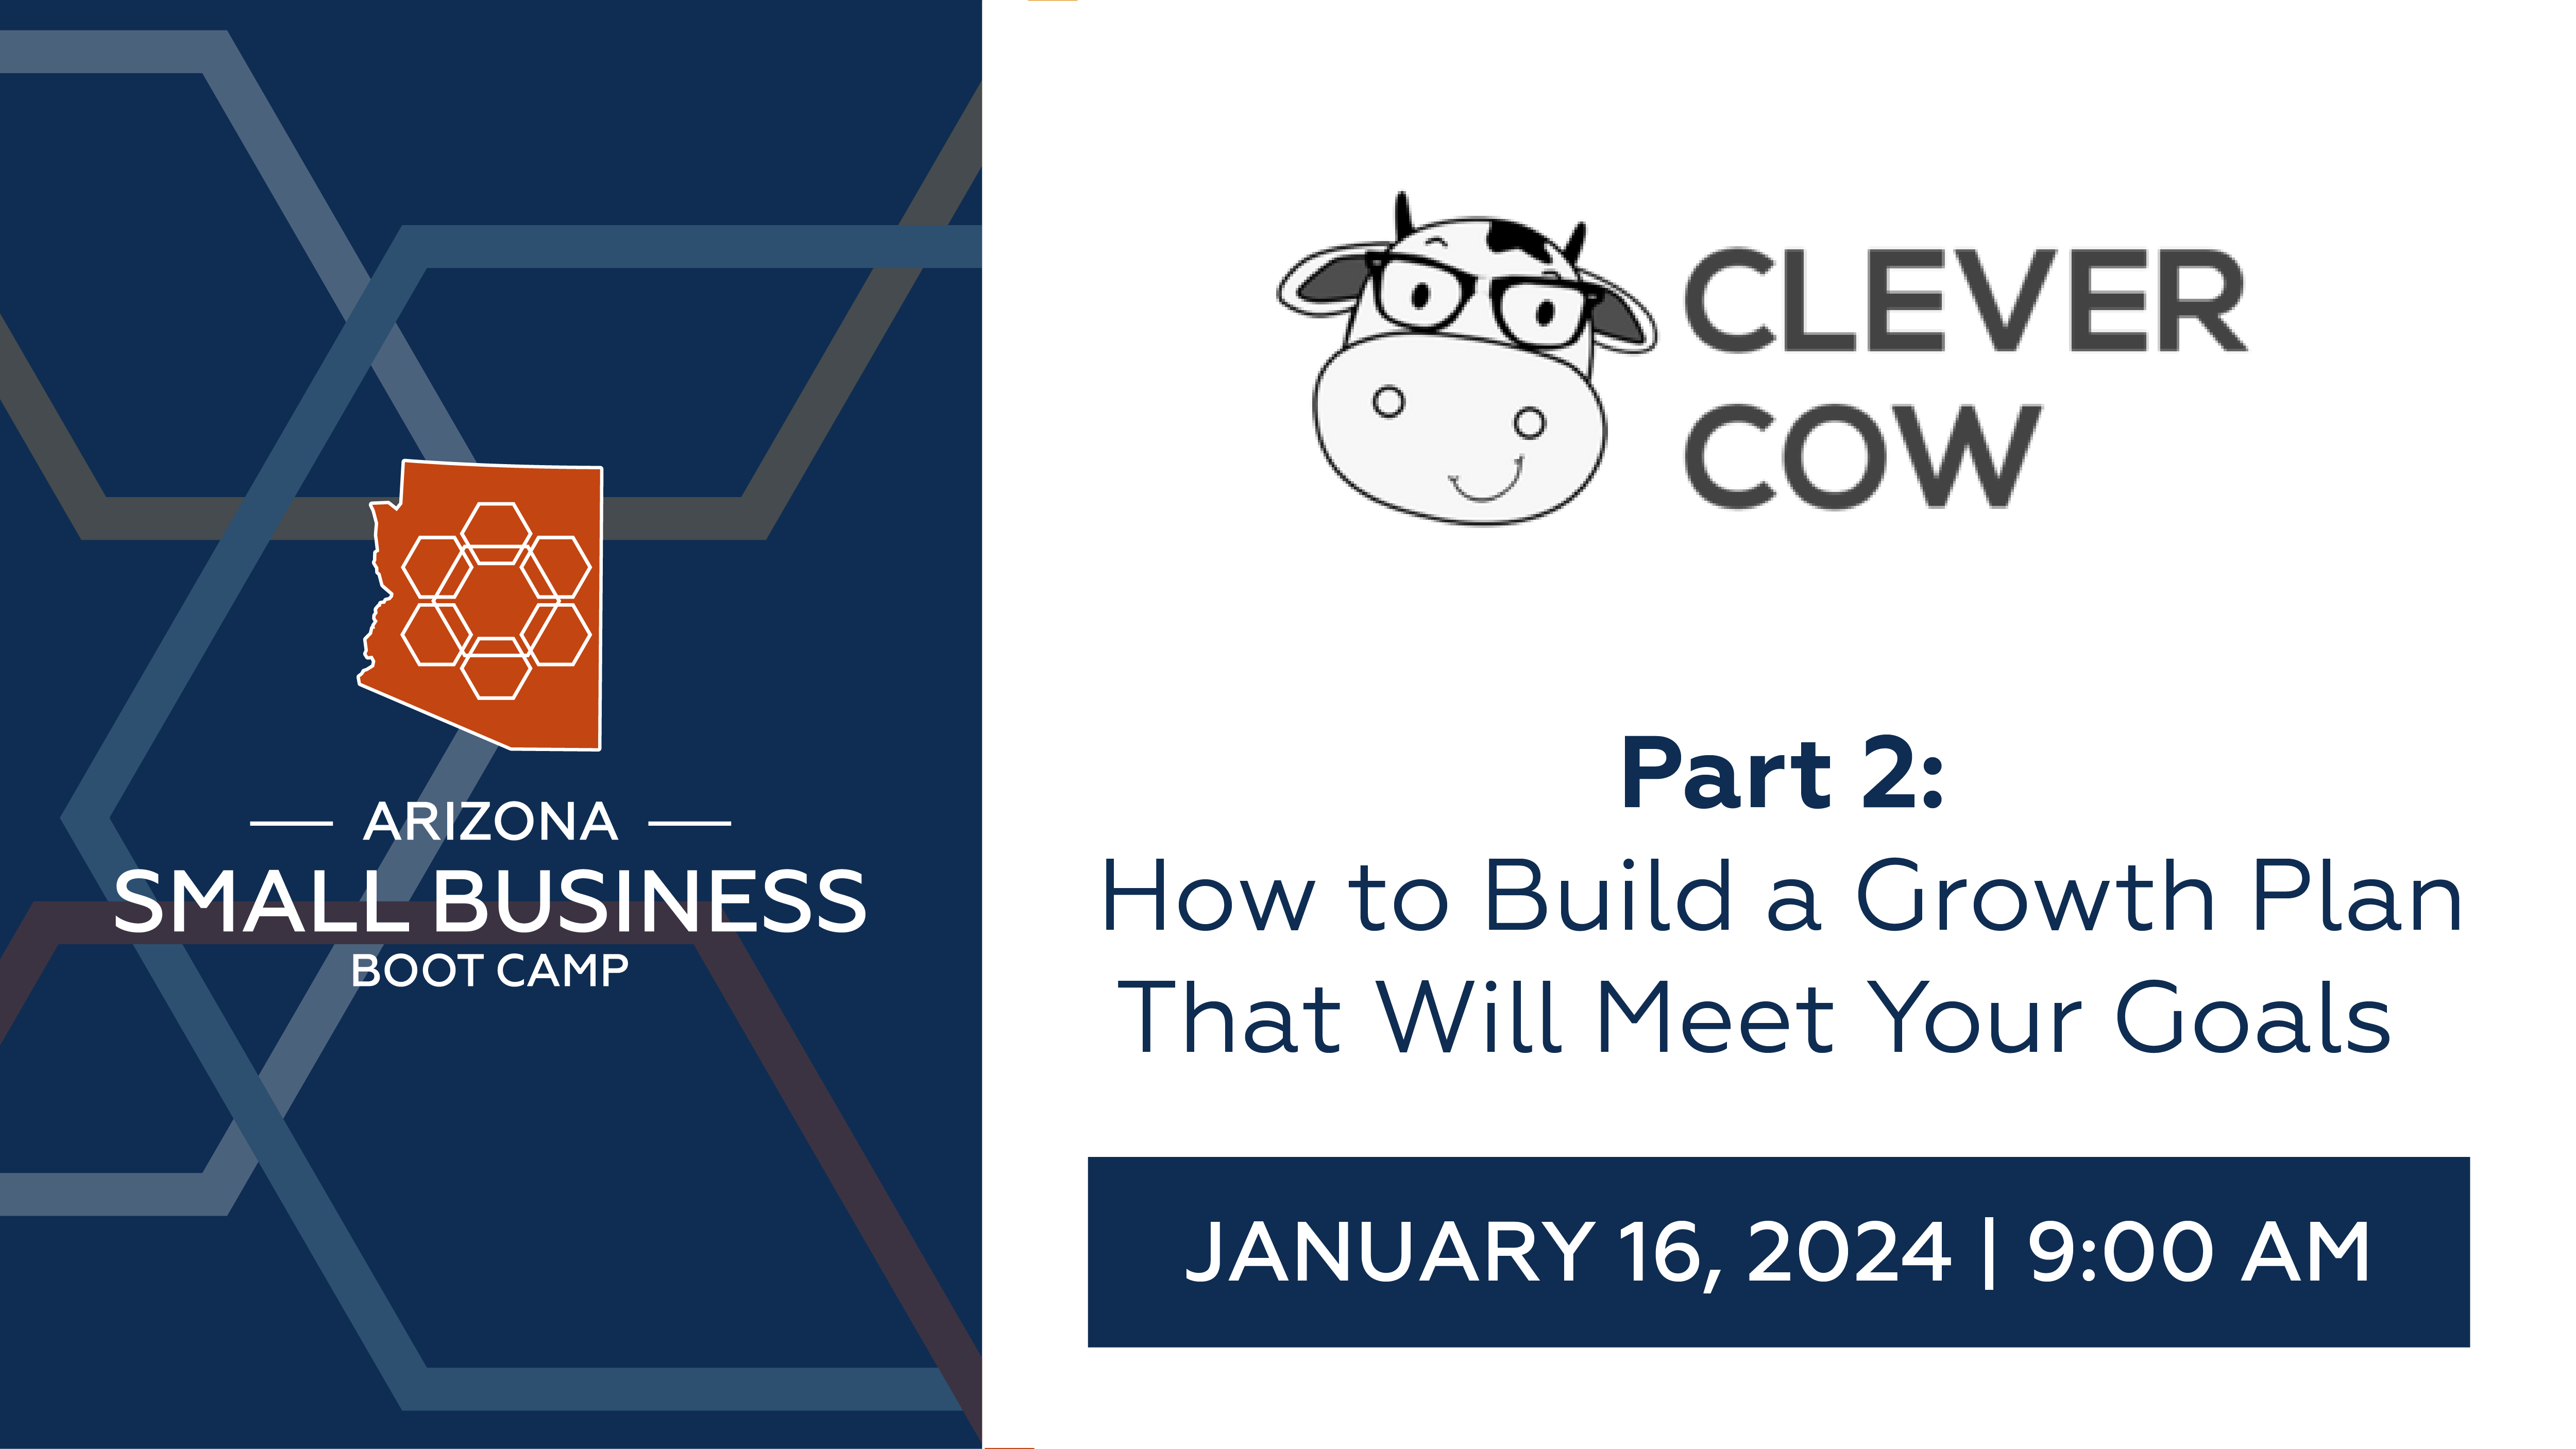 Part 2: How to Build a Growth Plan That Will Meet Your Goals 